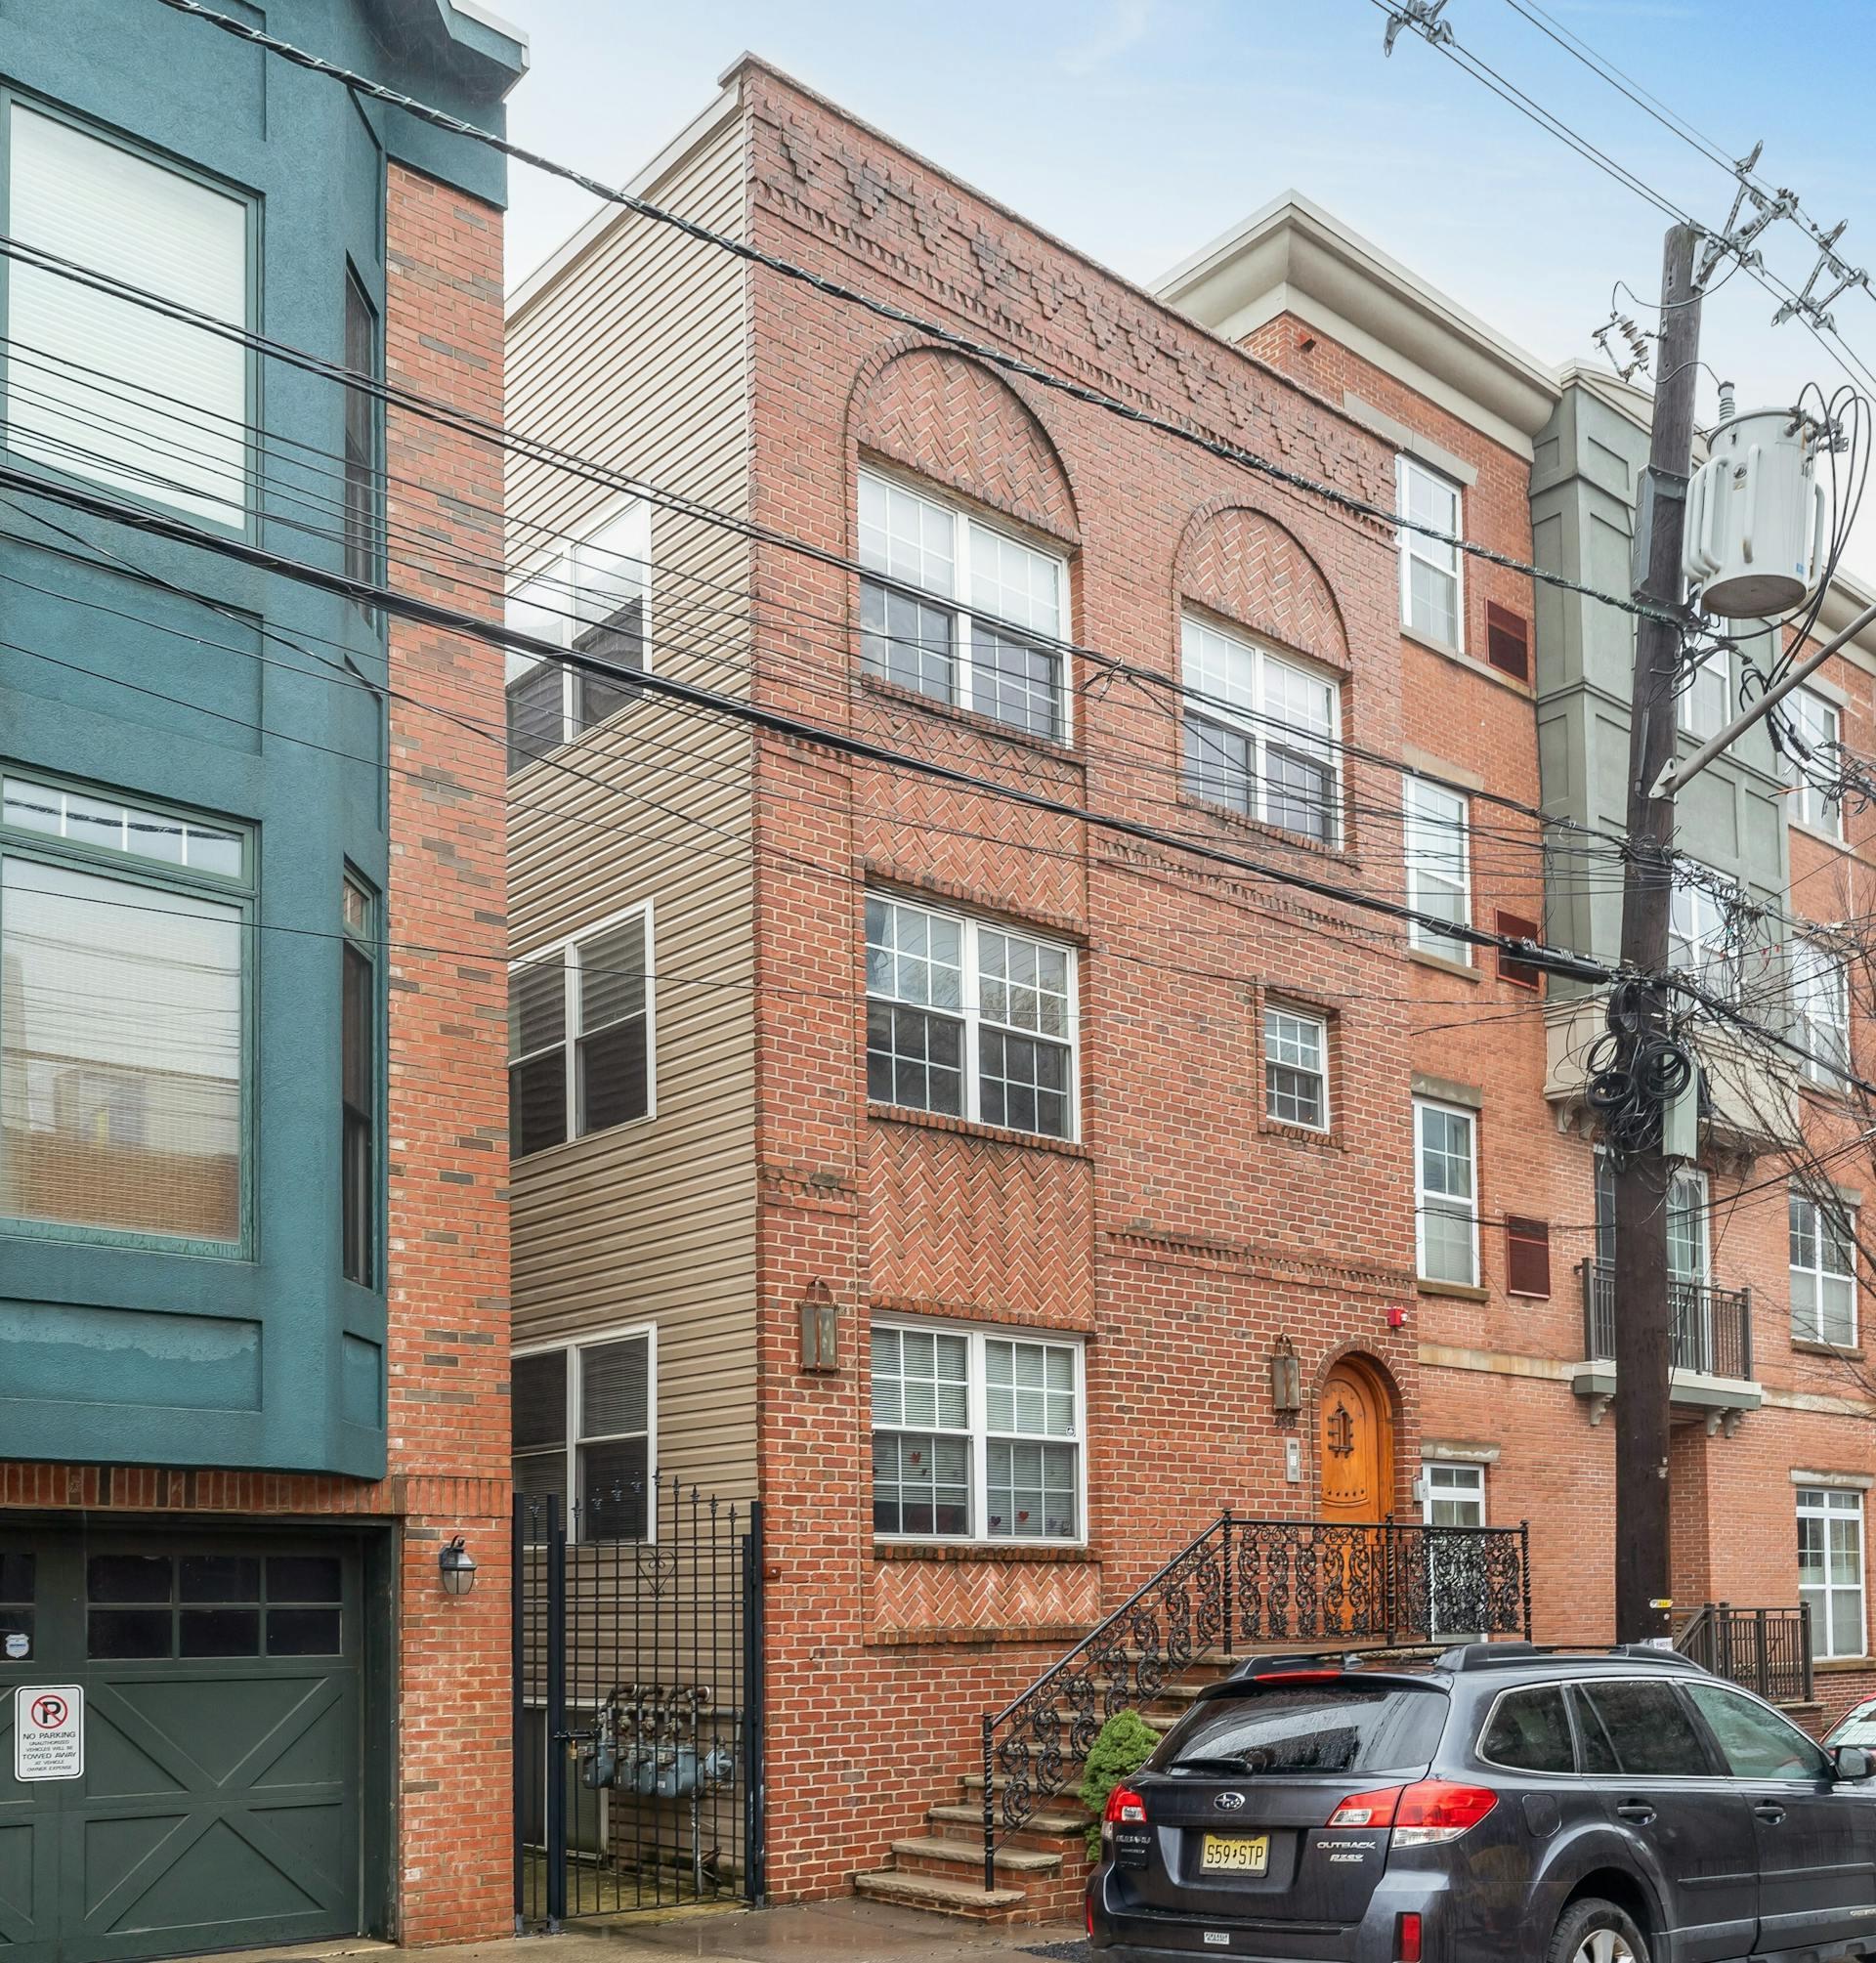 # 240006216 - For Rent in JERSEY CITY - Downtown NJ